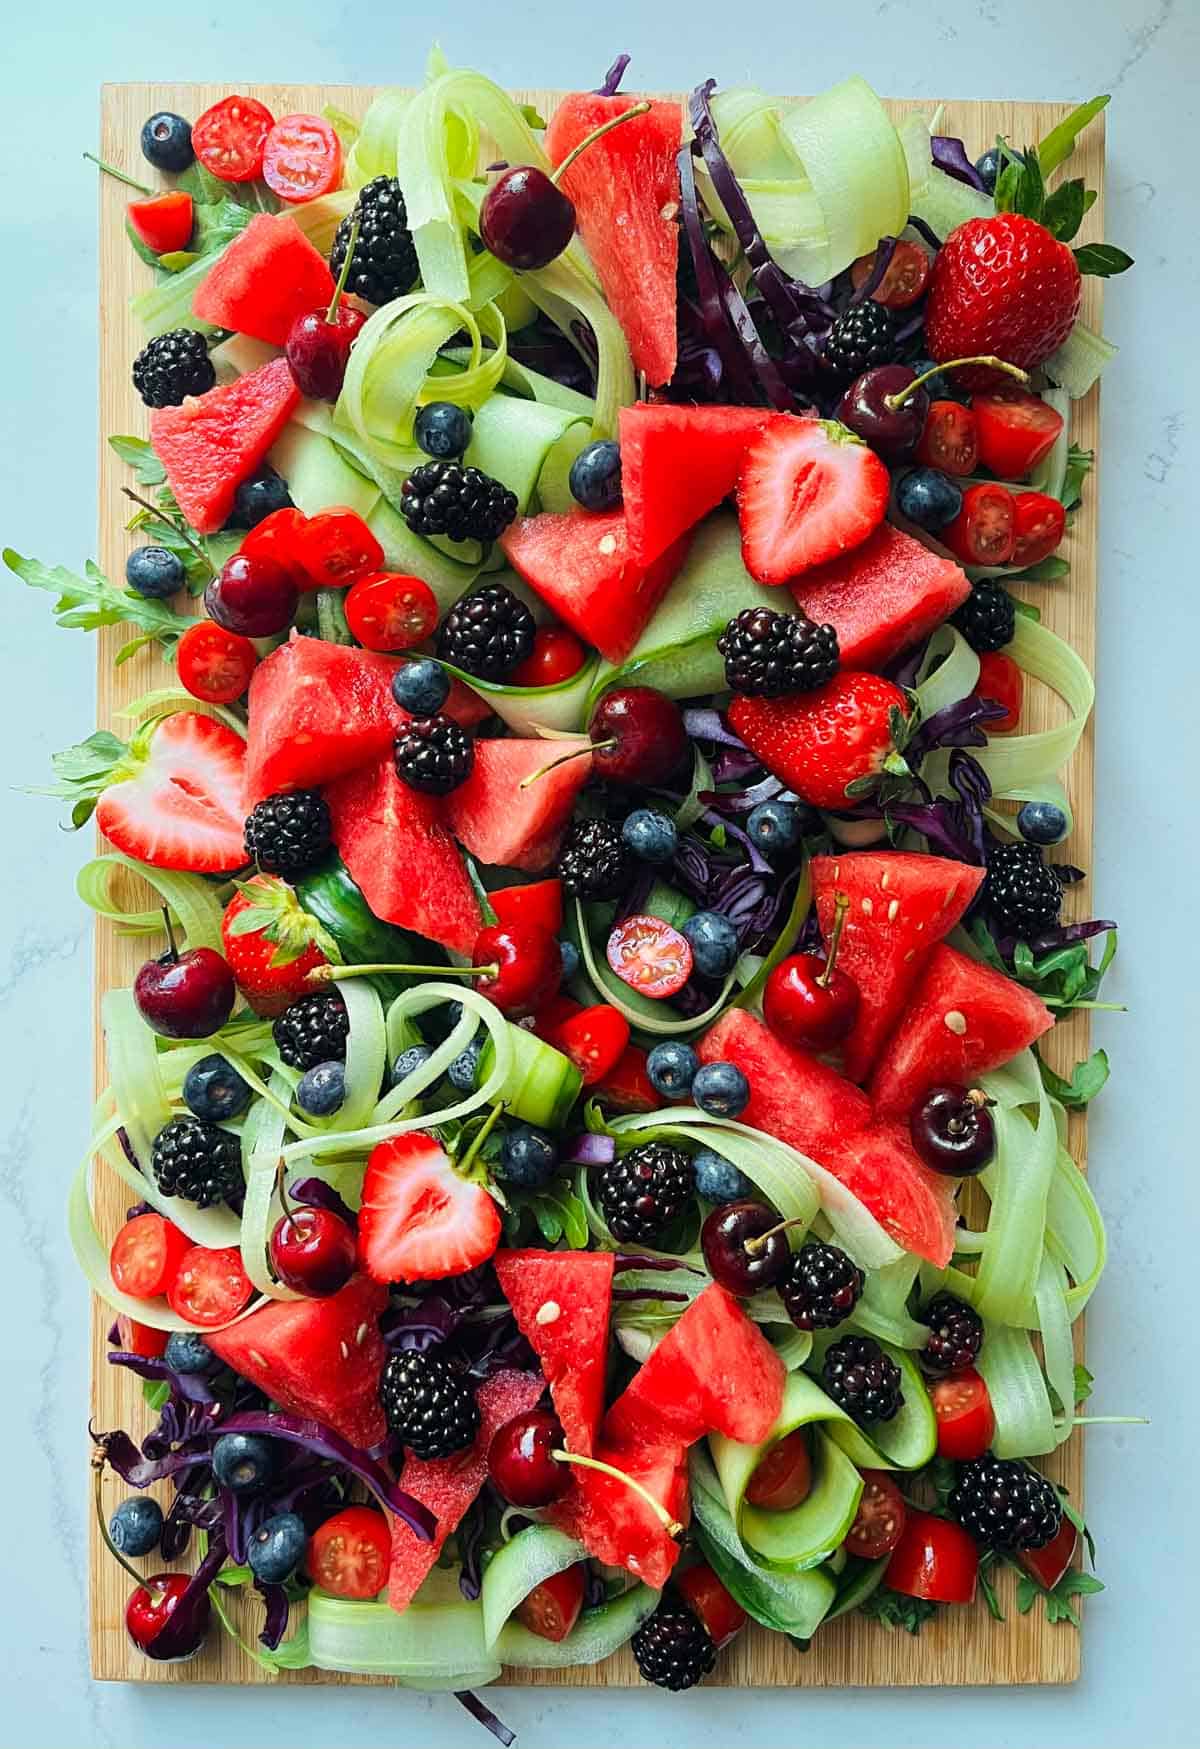 Rocket leaves, chopped red cabbage, celery and cucumber ribbons, watermelon, strawberries, tomatoes, blackberries, blueberries and cherries on a wooded board.